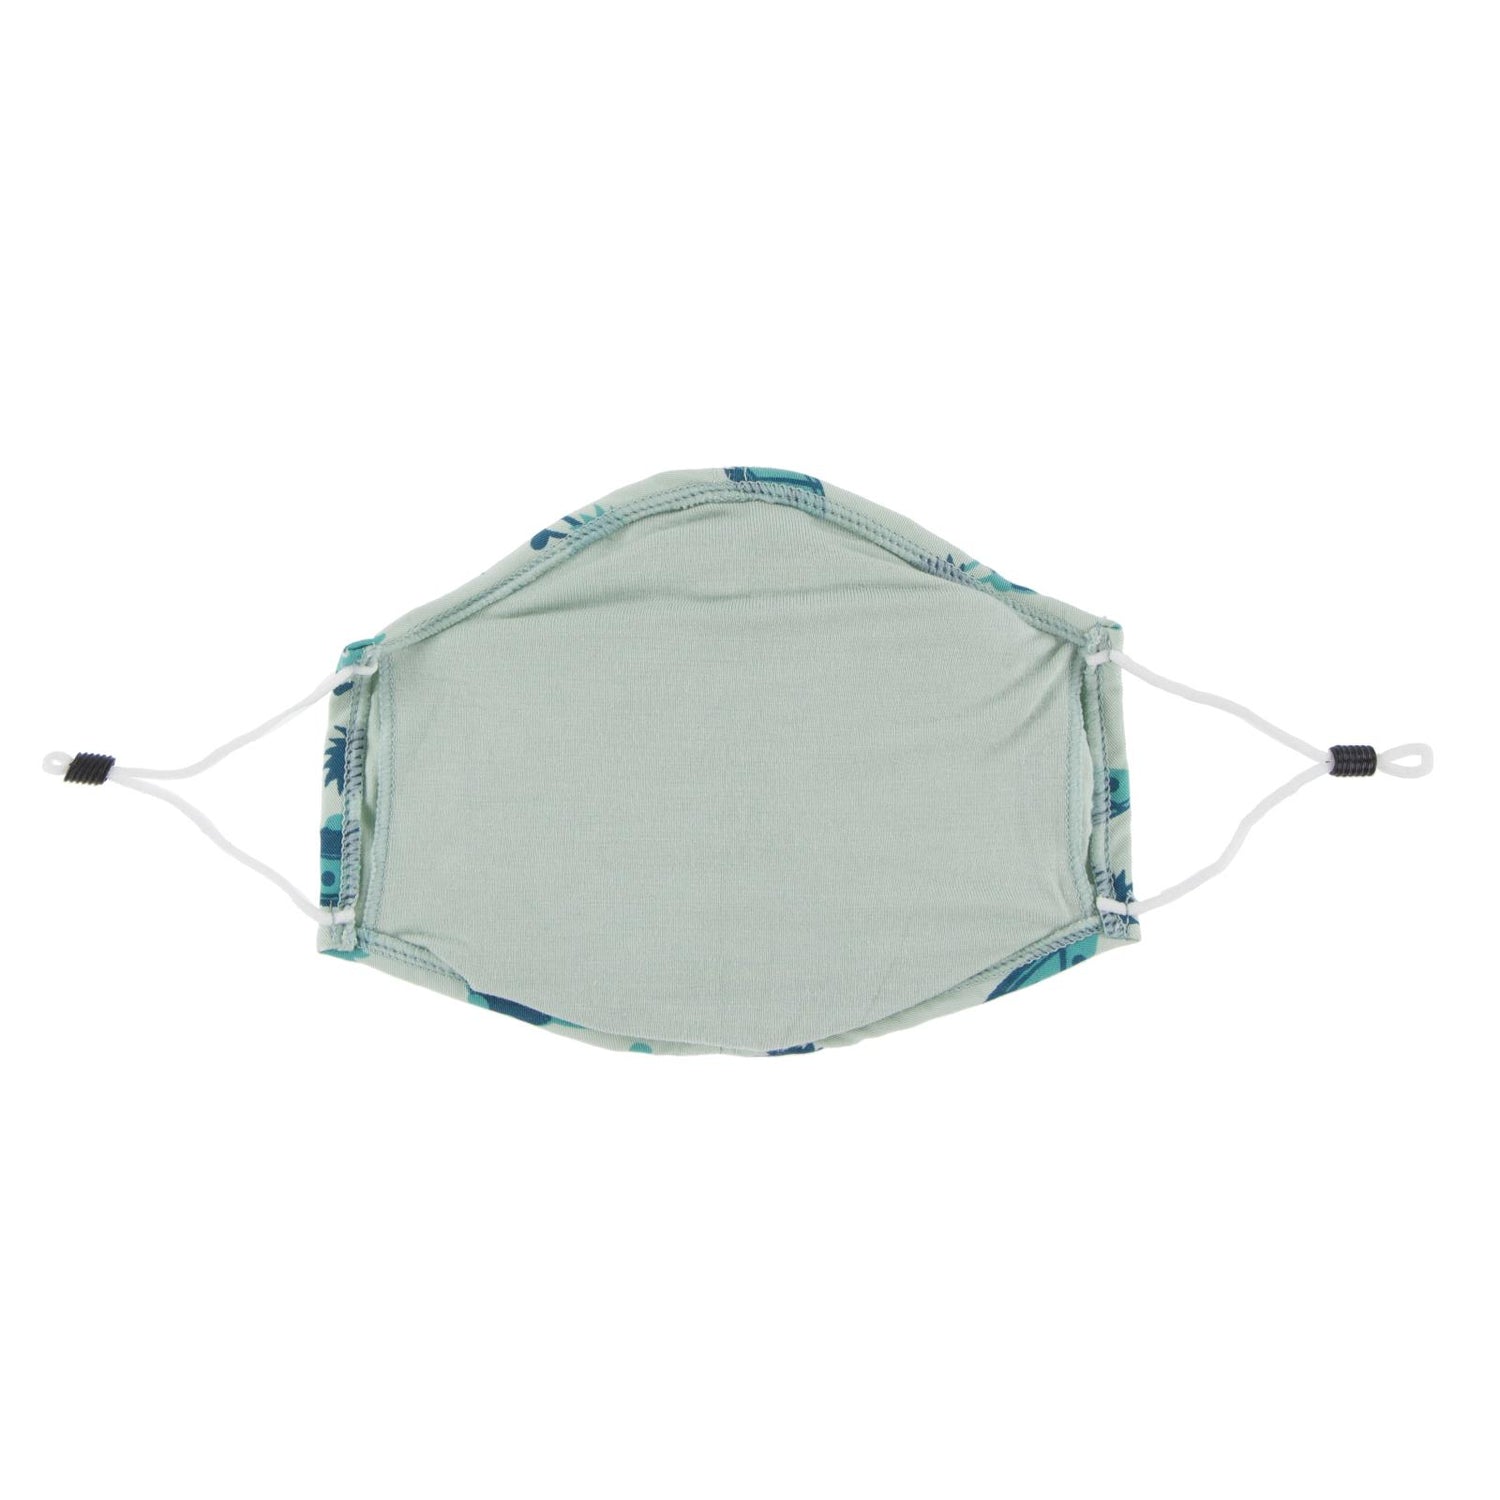 Print Waterproof Mask with Covered Vent and Filter for Adults in Aloe Aliens with Flying Saucers